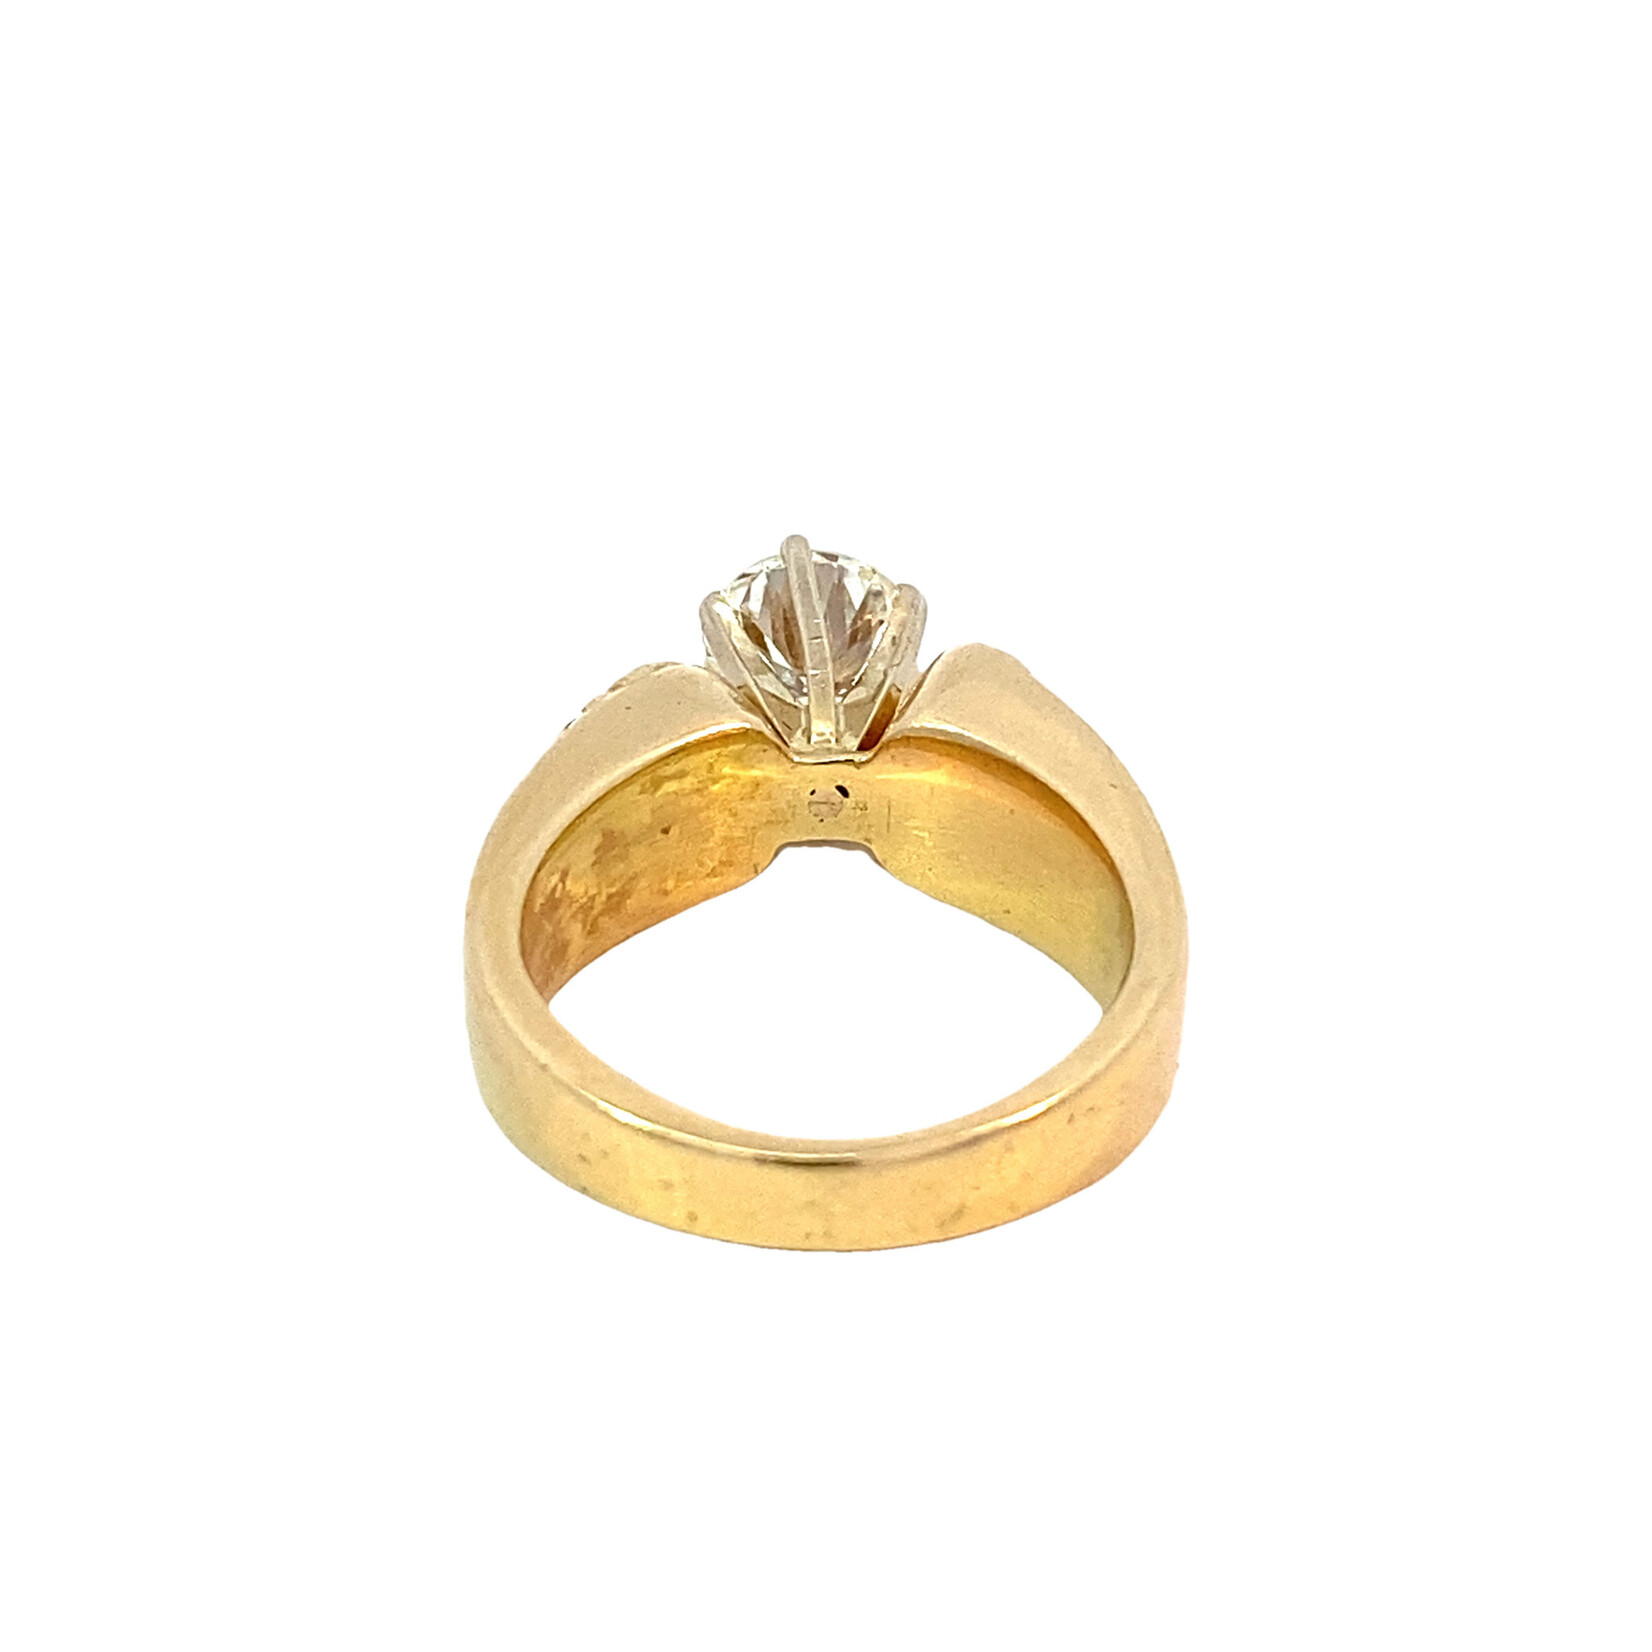 14K Yellow Gold Diamond Solitaire Ring 1ct VS1/H size 5.25